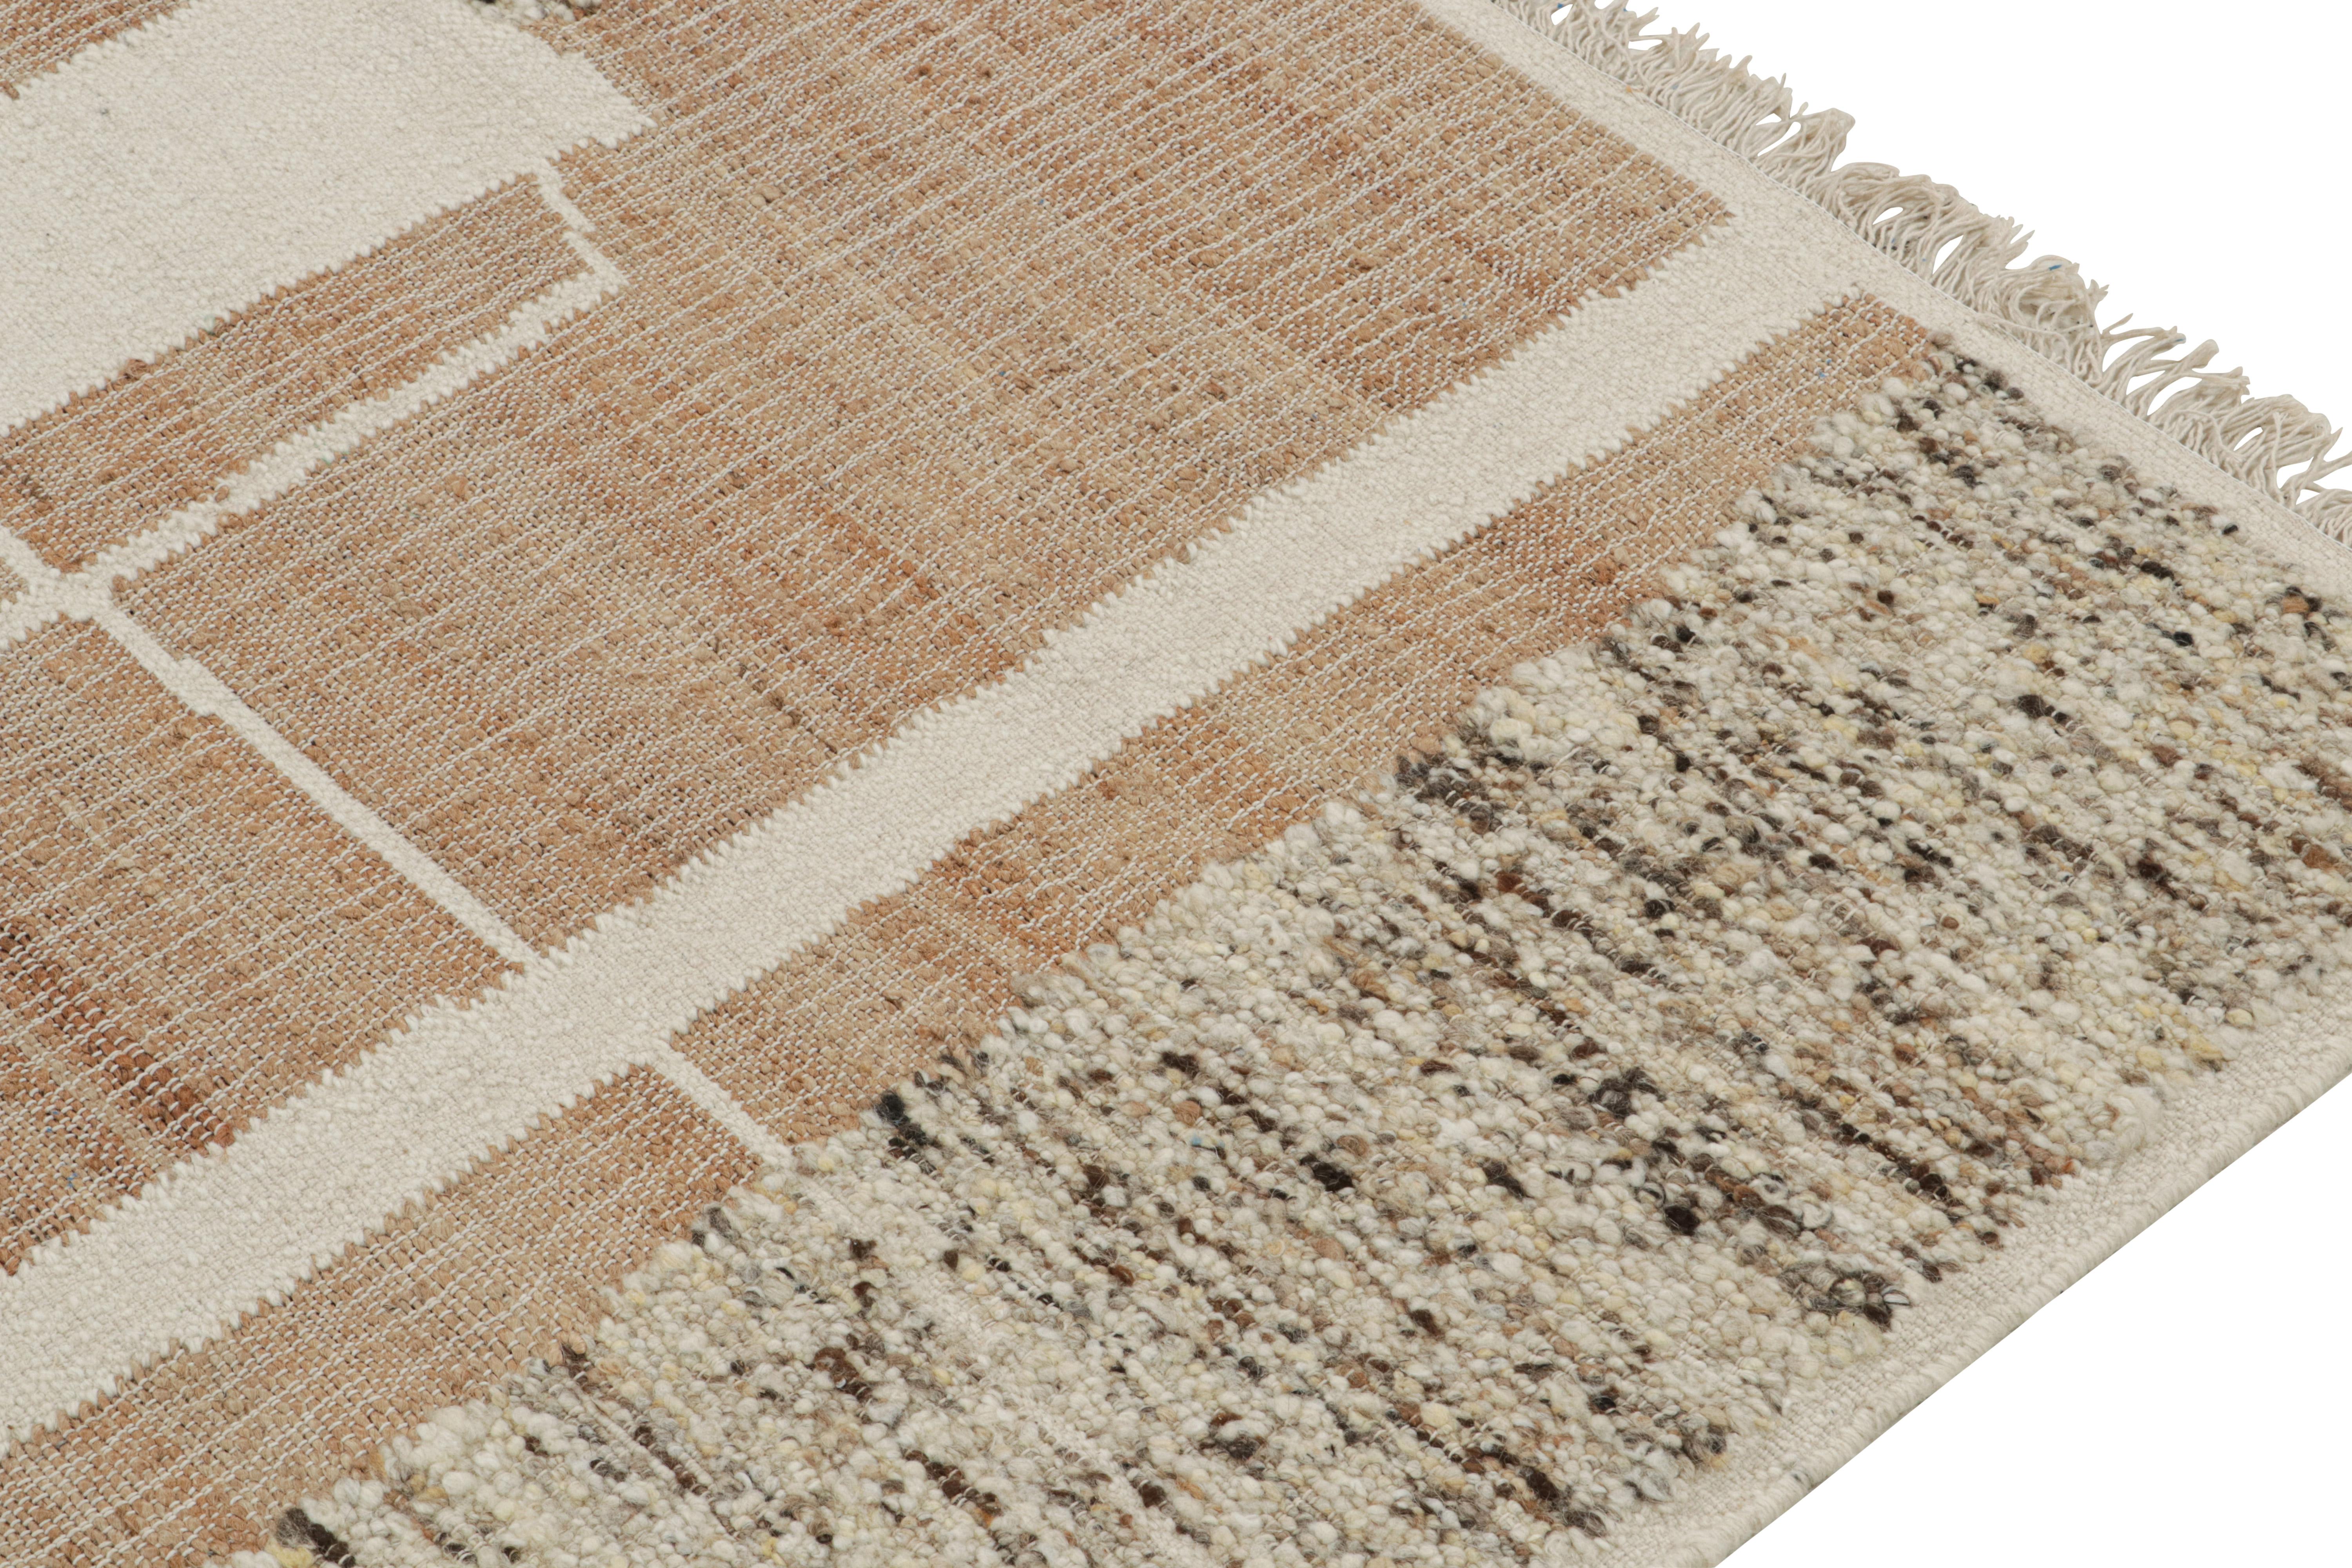 Hand-Woven Rug & Kilim’s Contemporary kilim rug in Beige-Brown & White Abstract Pattern For Sale